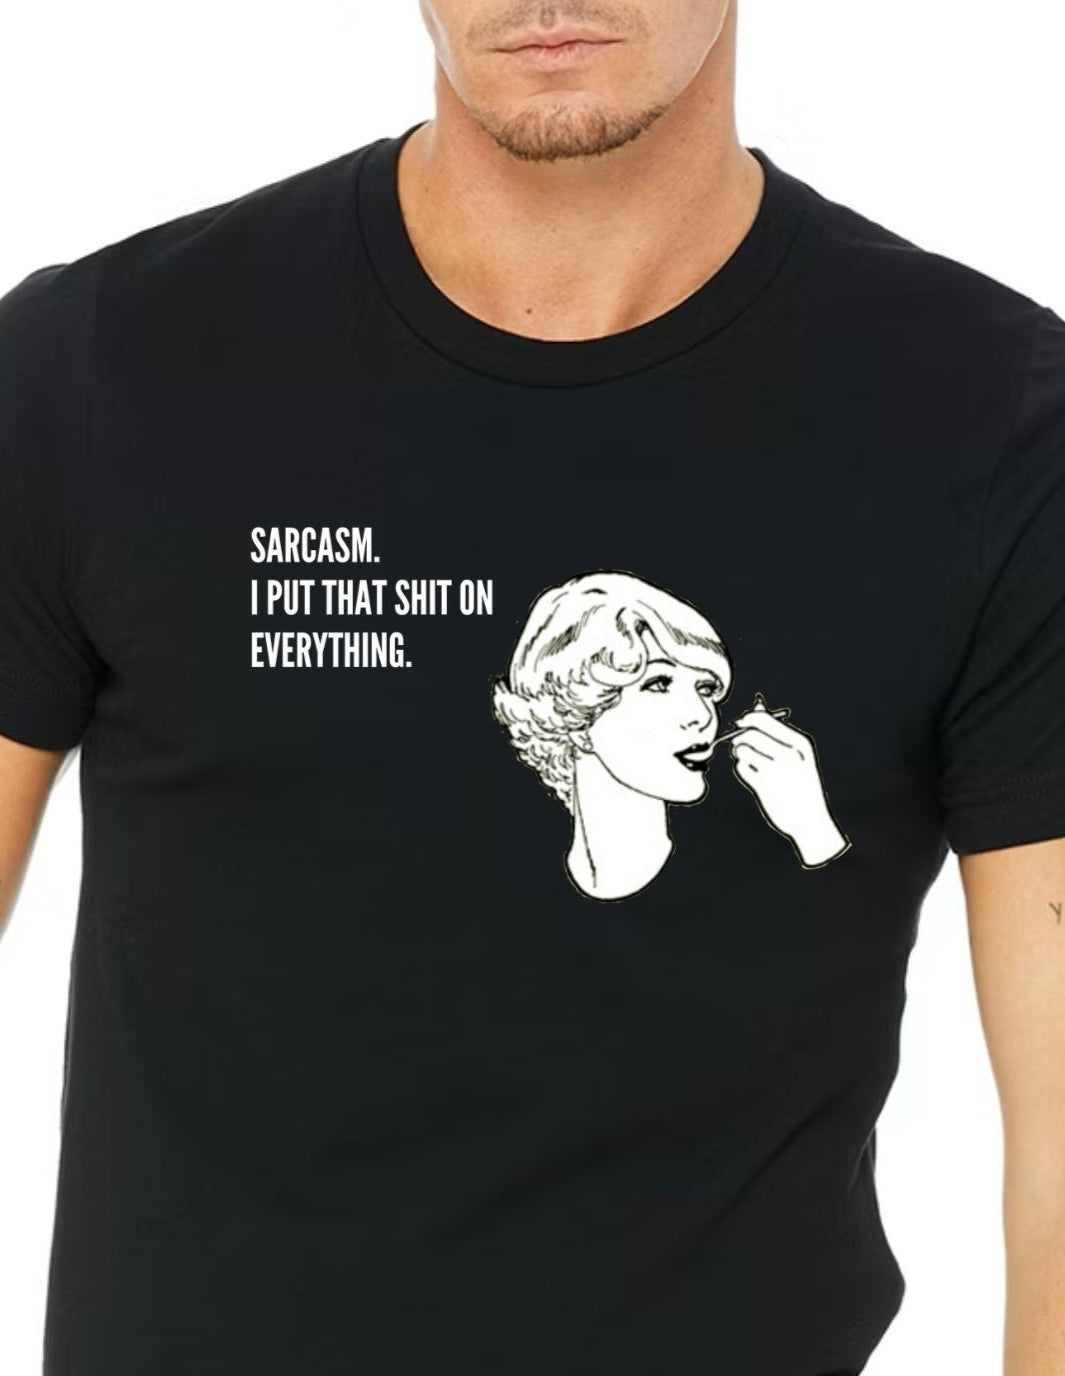 Cute funny sarcastic shirt that says - sarcasm. I put that shit on everything. 